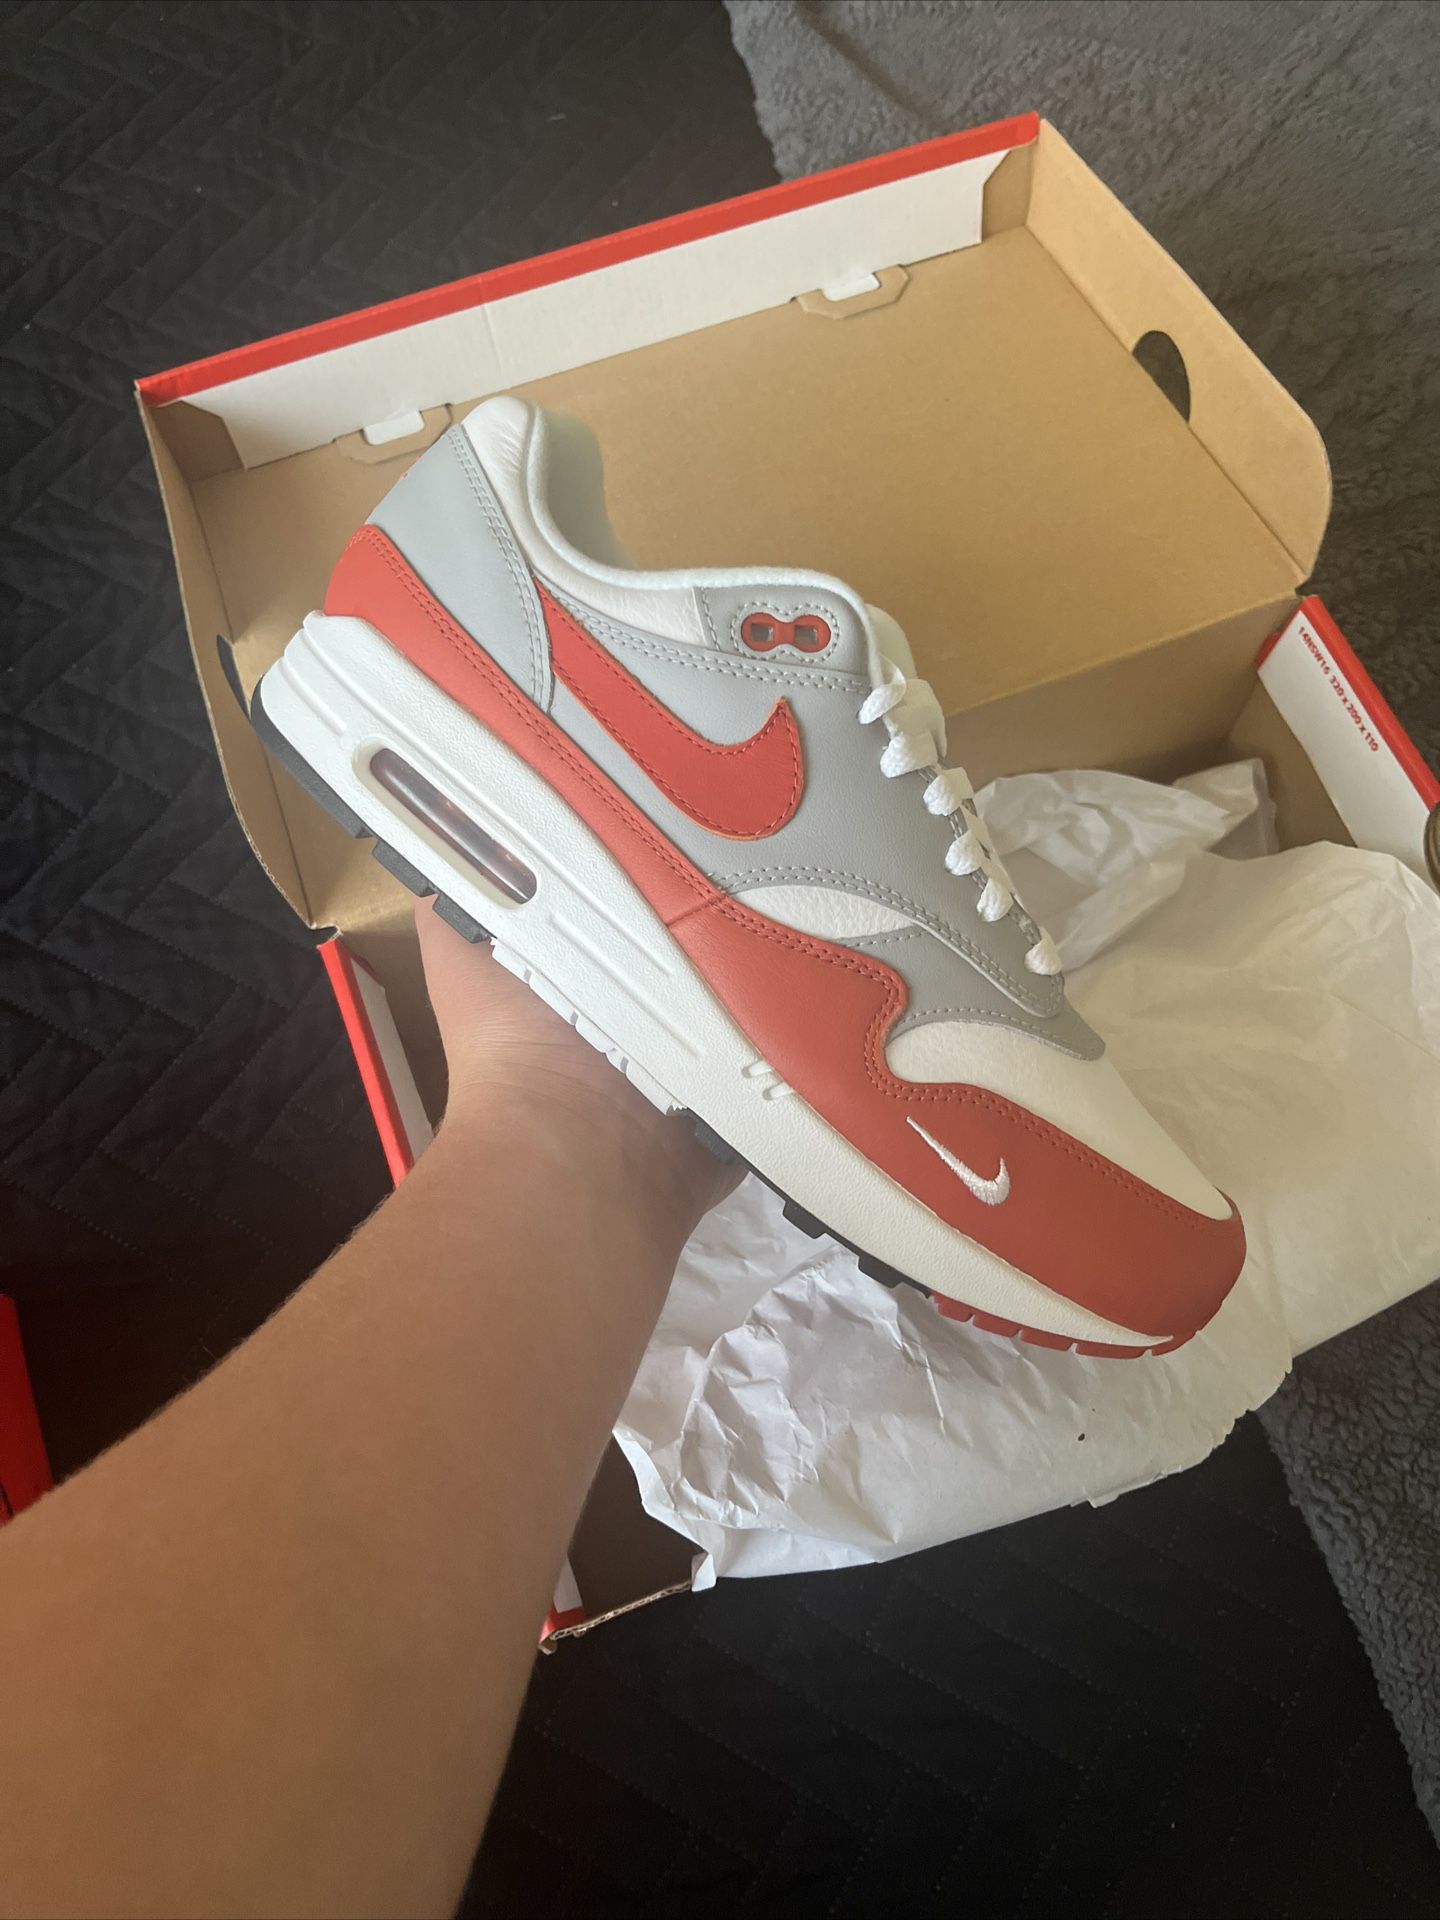 Size+10+-+Nike+Air+Max+1+LV8+Martian+Sunrise+2021 for sale online